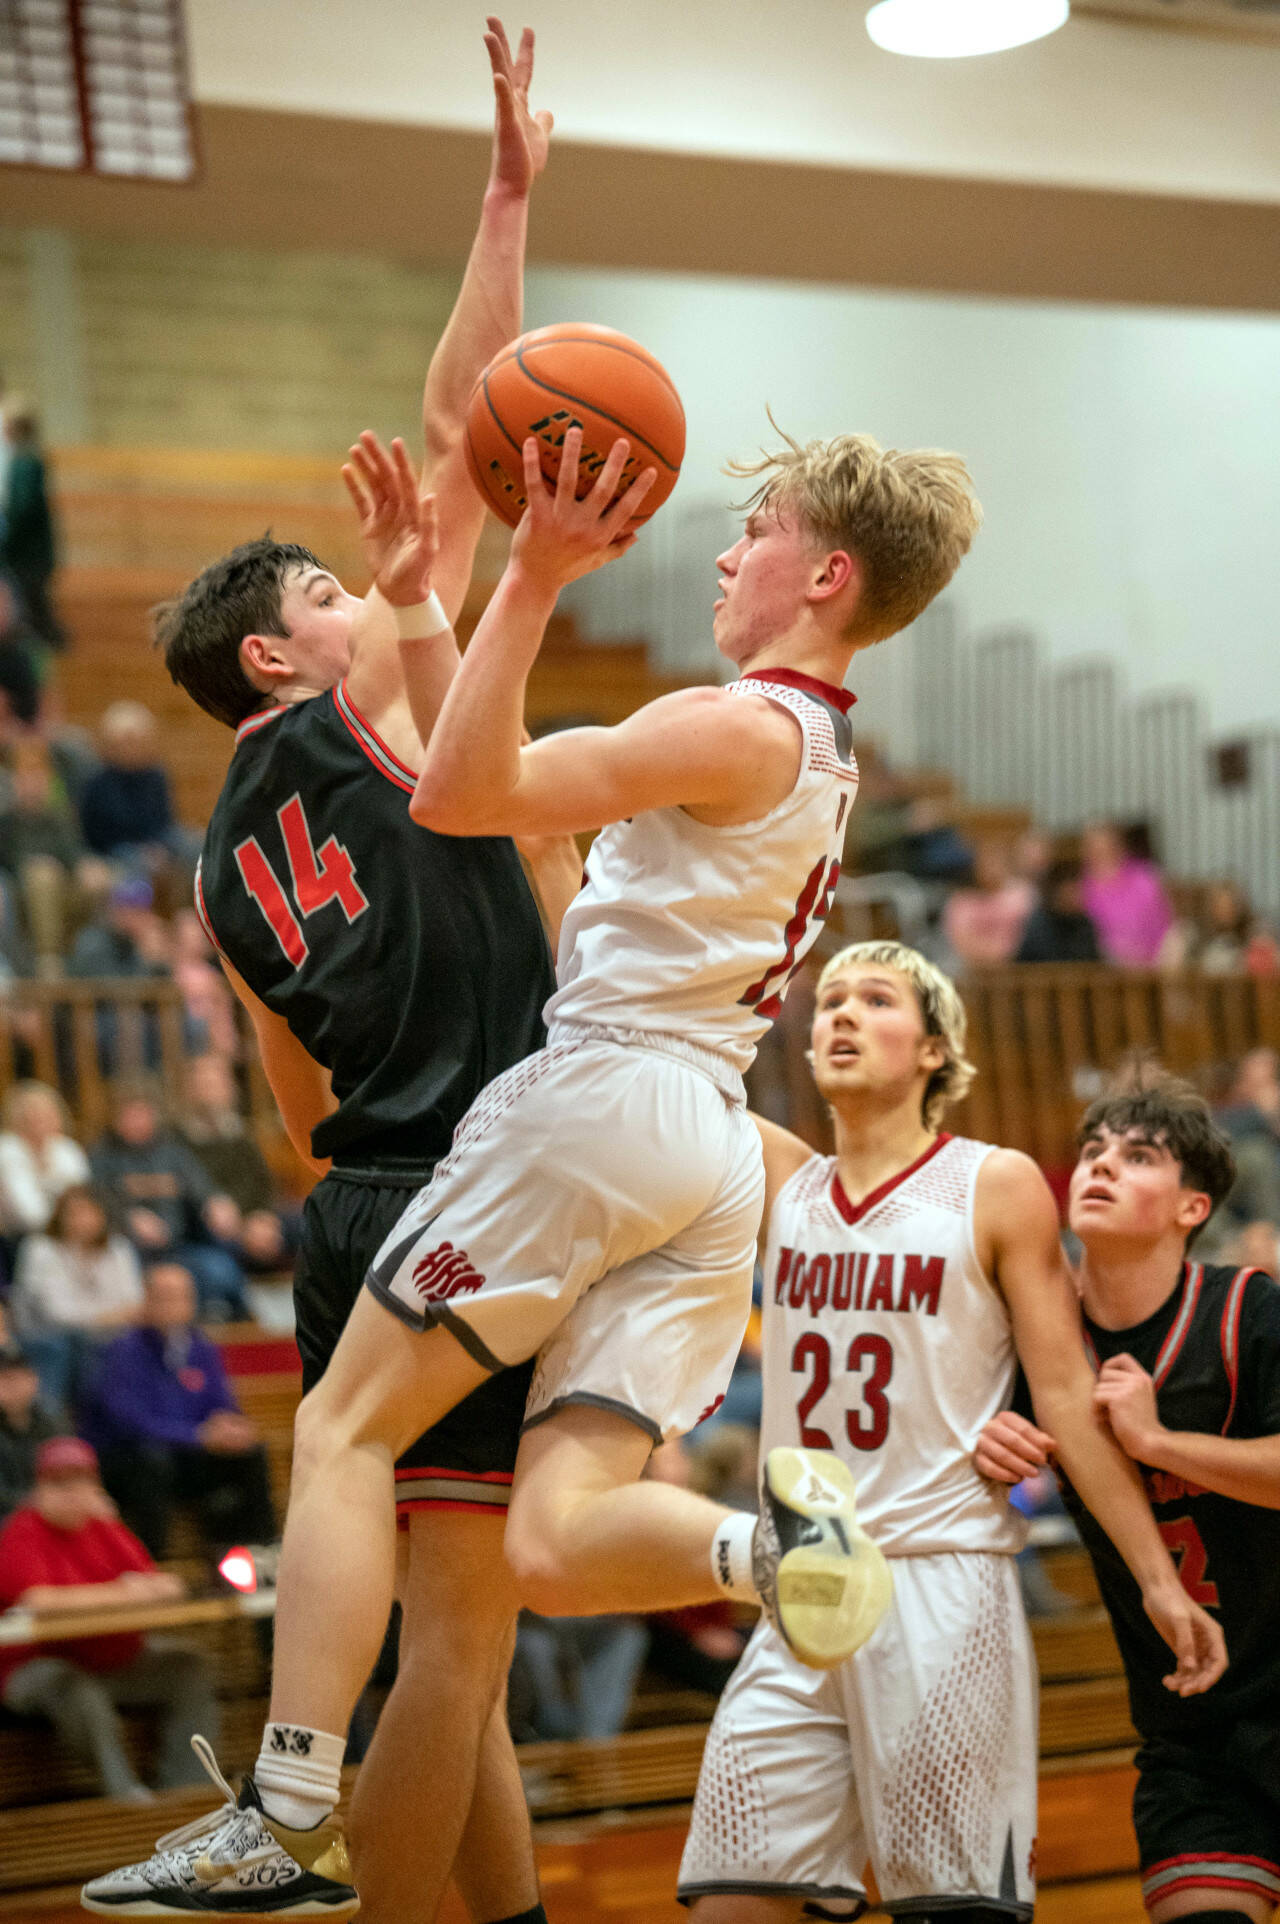 PHOTO BY FOREST WORGUM Hoquiam guard Michael Lorton Watkins glides to the hoop while being defended by Tenino’s Brody Noonan (14) during the Grizzlies’ 62-47 loss on Friday in Hoquiam.